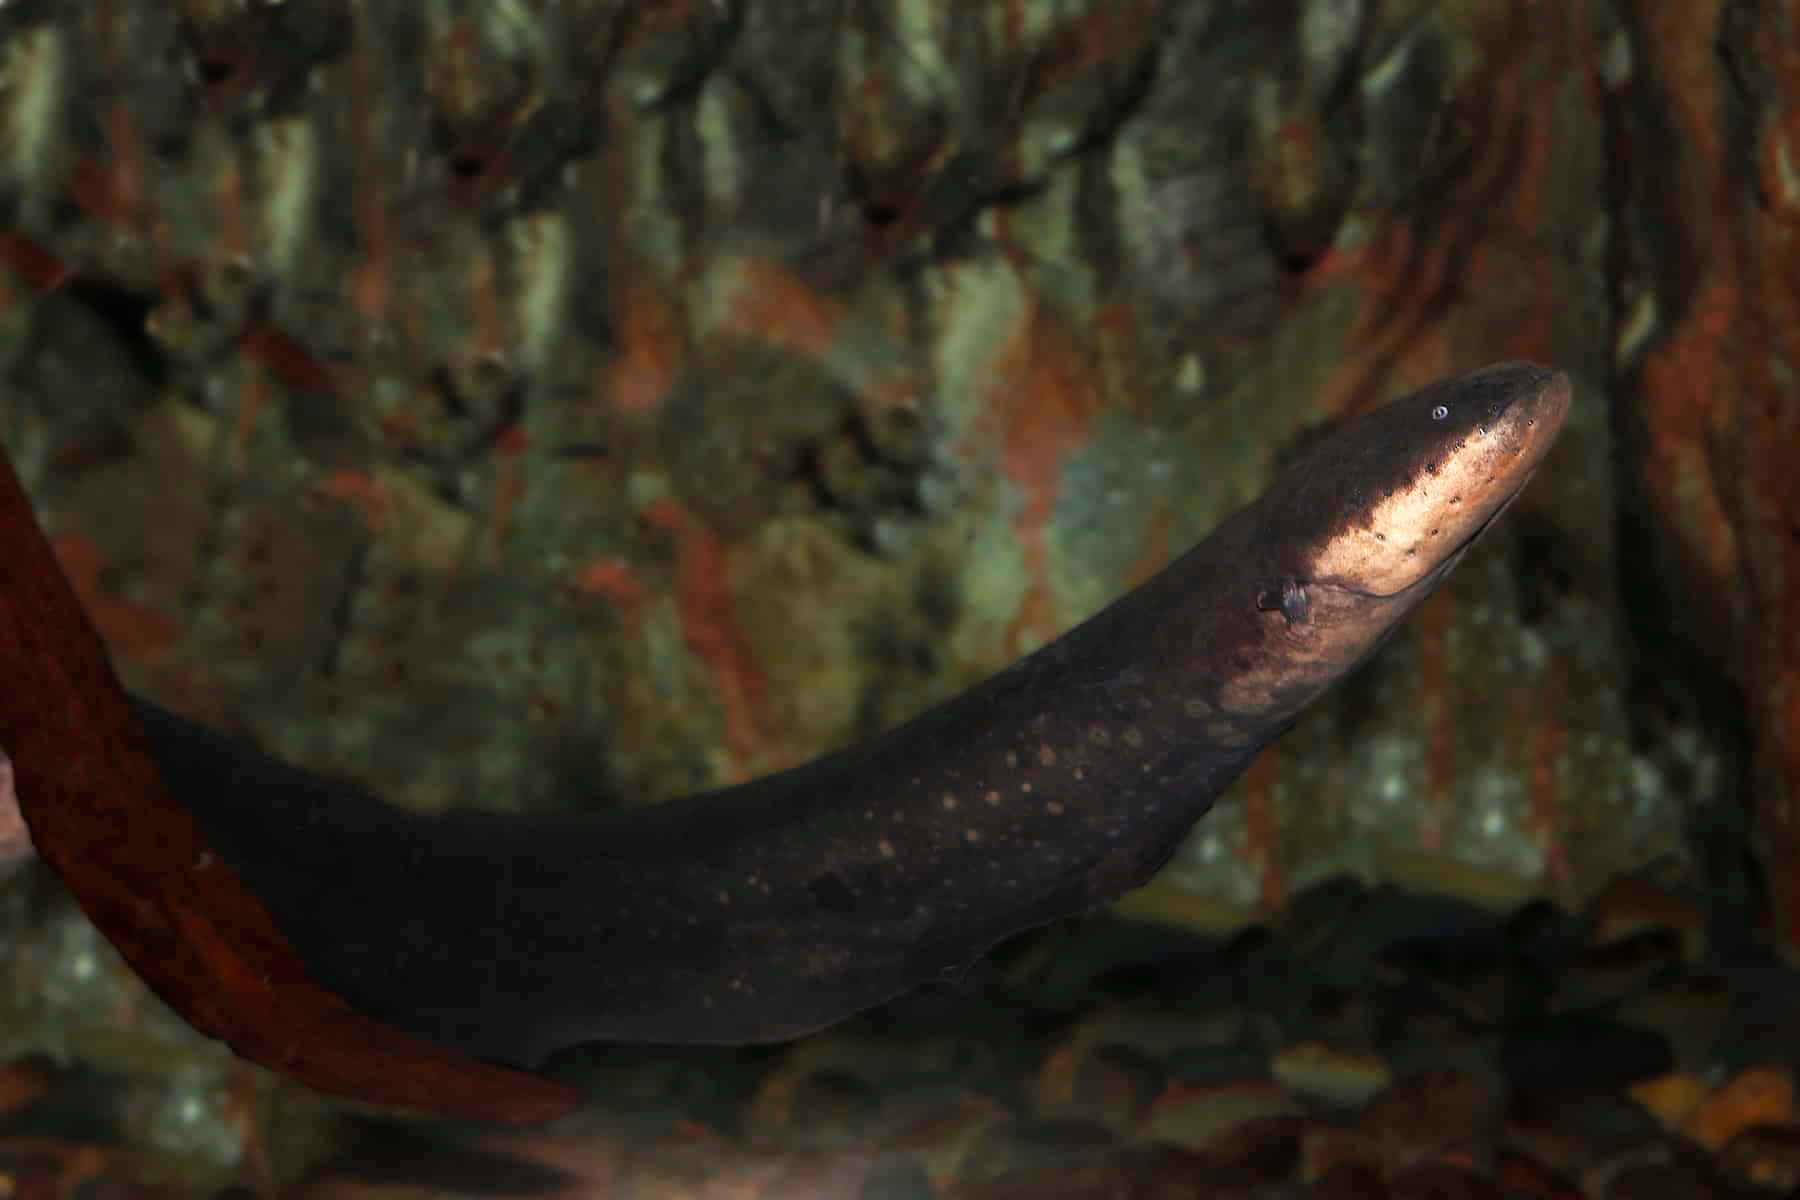 An electric eel ready to attack its prey